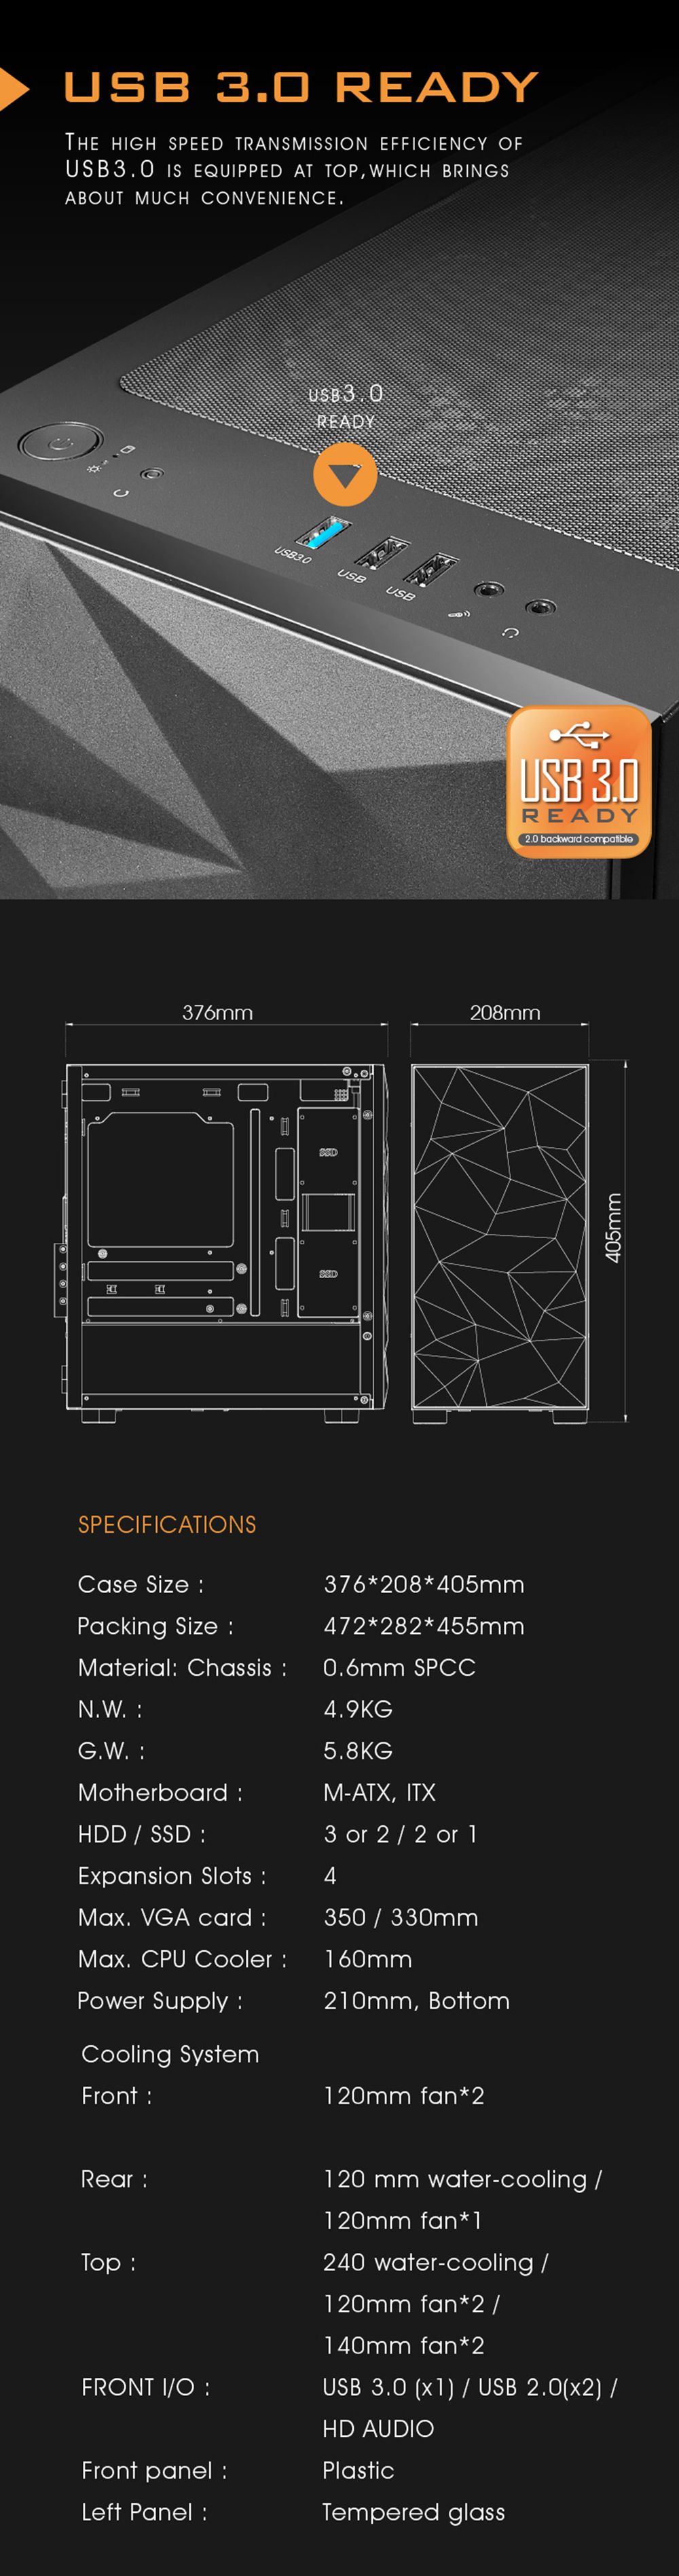 DarkFlash-DLM21-Gaming-Computer-Case-ATXM-ATXITX-Supported-Tempered-Glass-Door-Opening-Air-Inlet-Bla-1666913